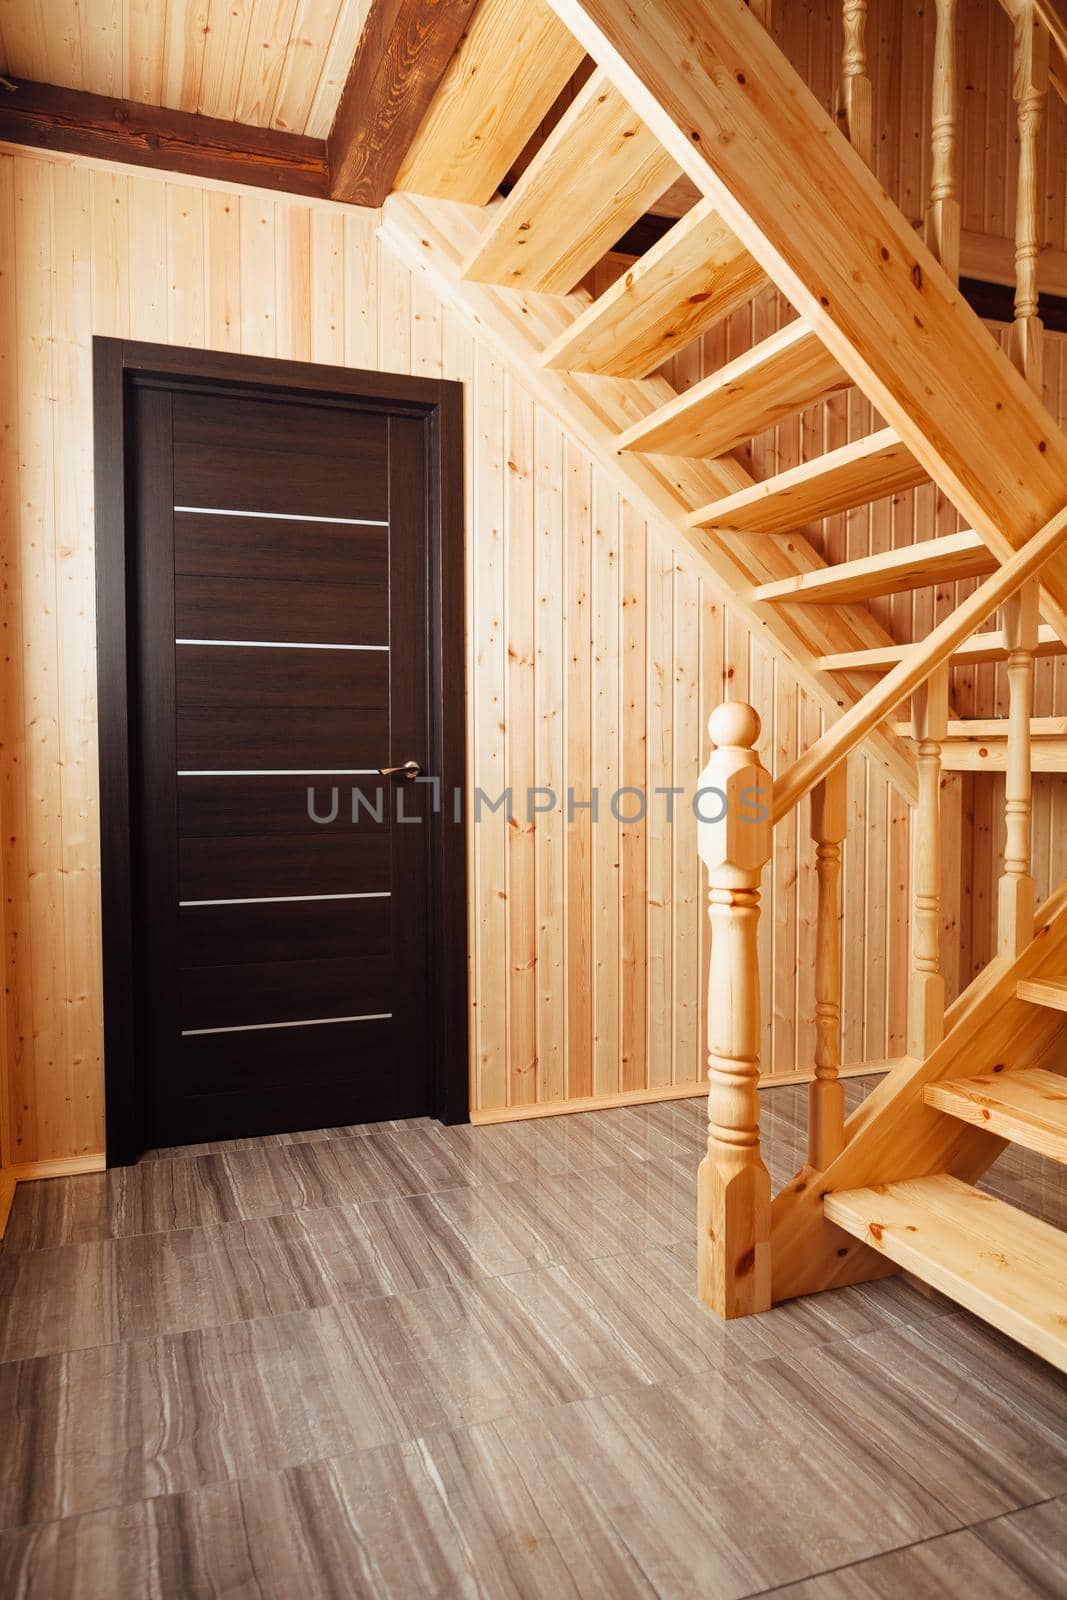 staircase and door inside of wooden house by nikkytok